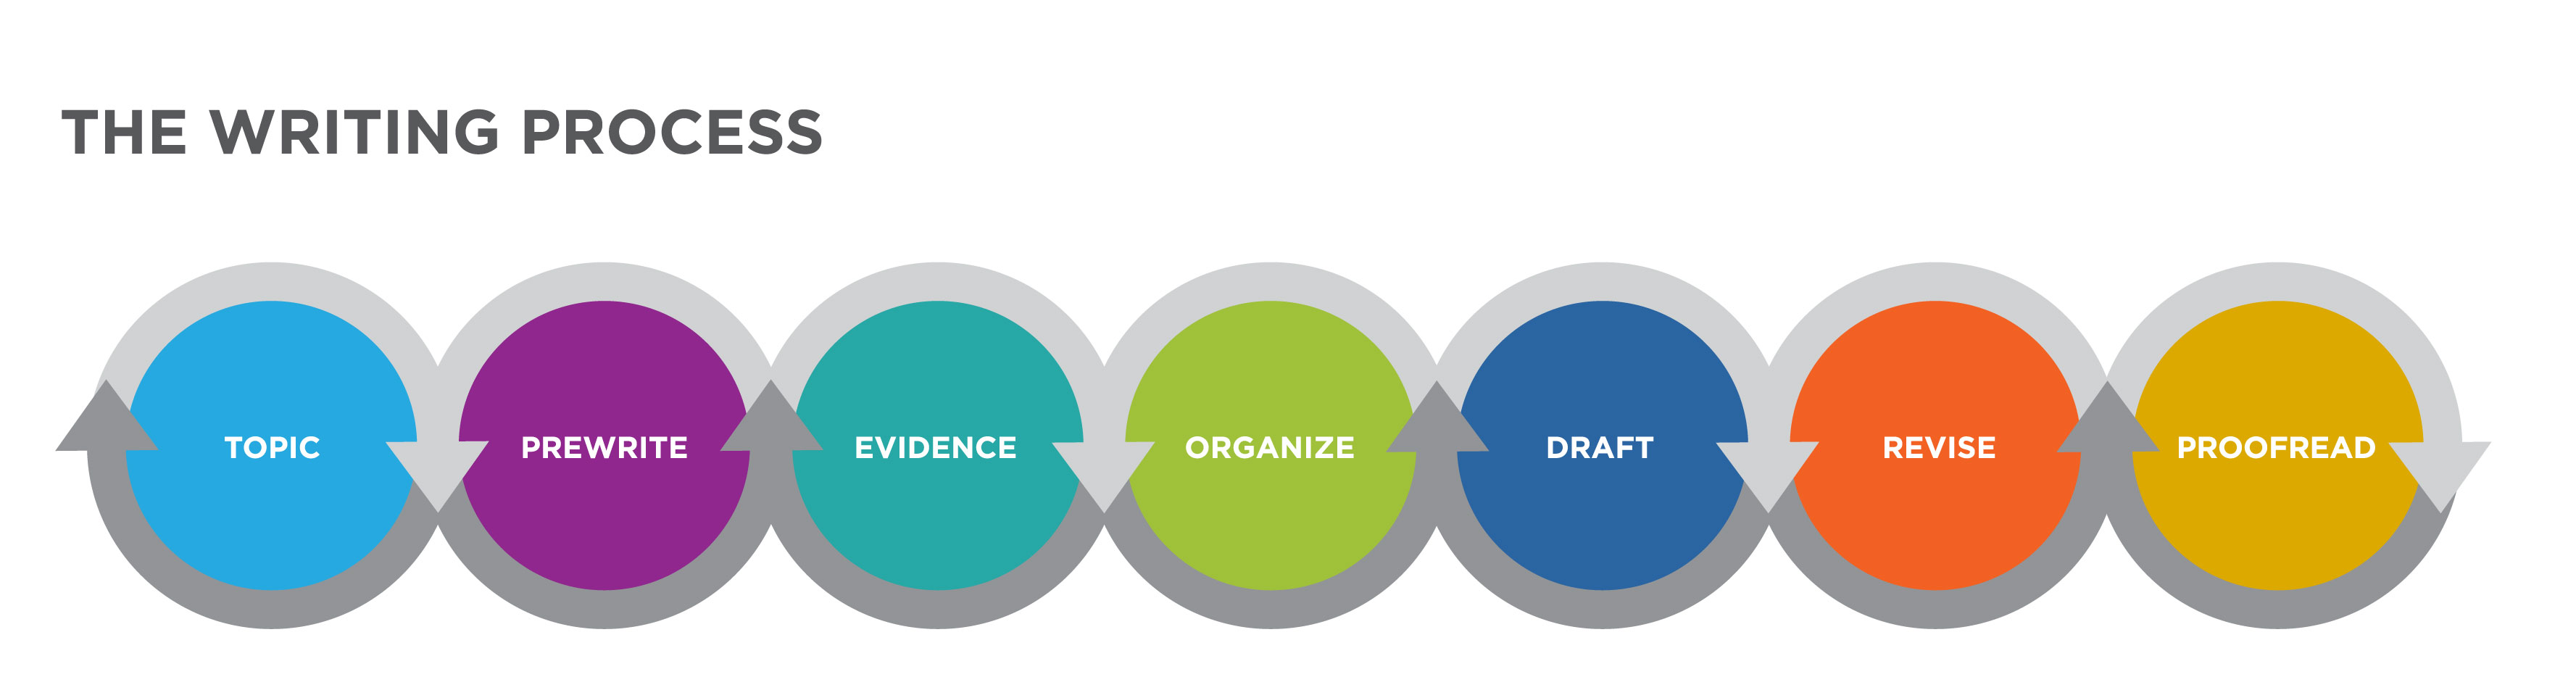 Graphic labeled "The Writing Process." From left to right, they read: Topic, Prewrite, Evidence, Organize, Draft, Revise, Proofread.